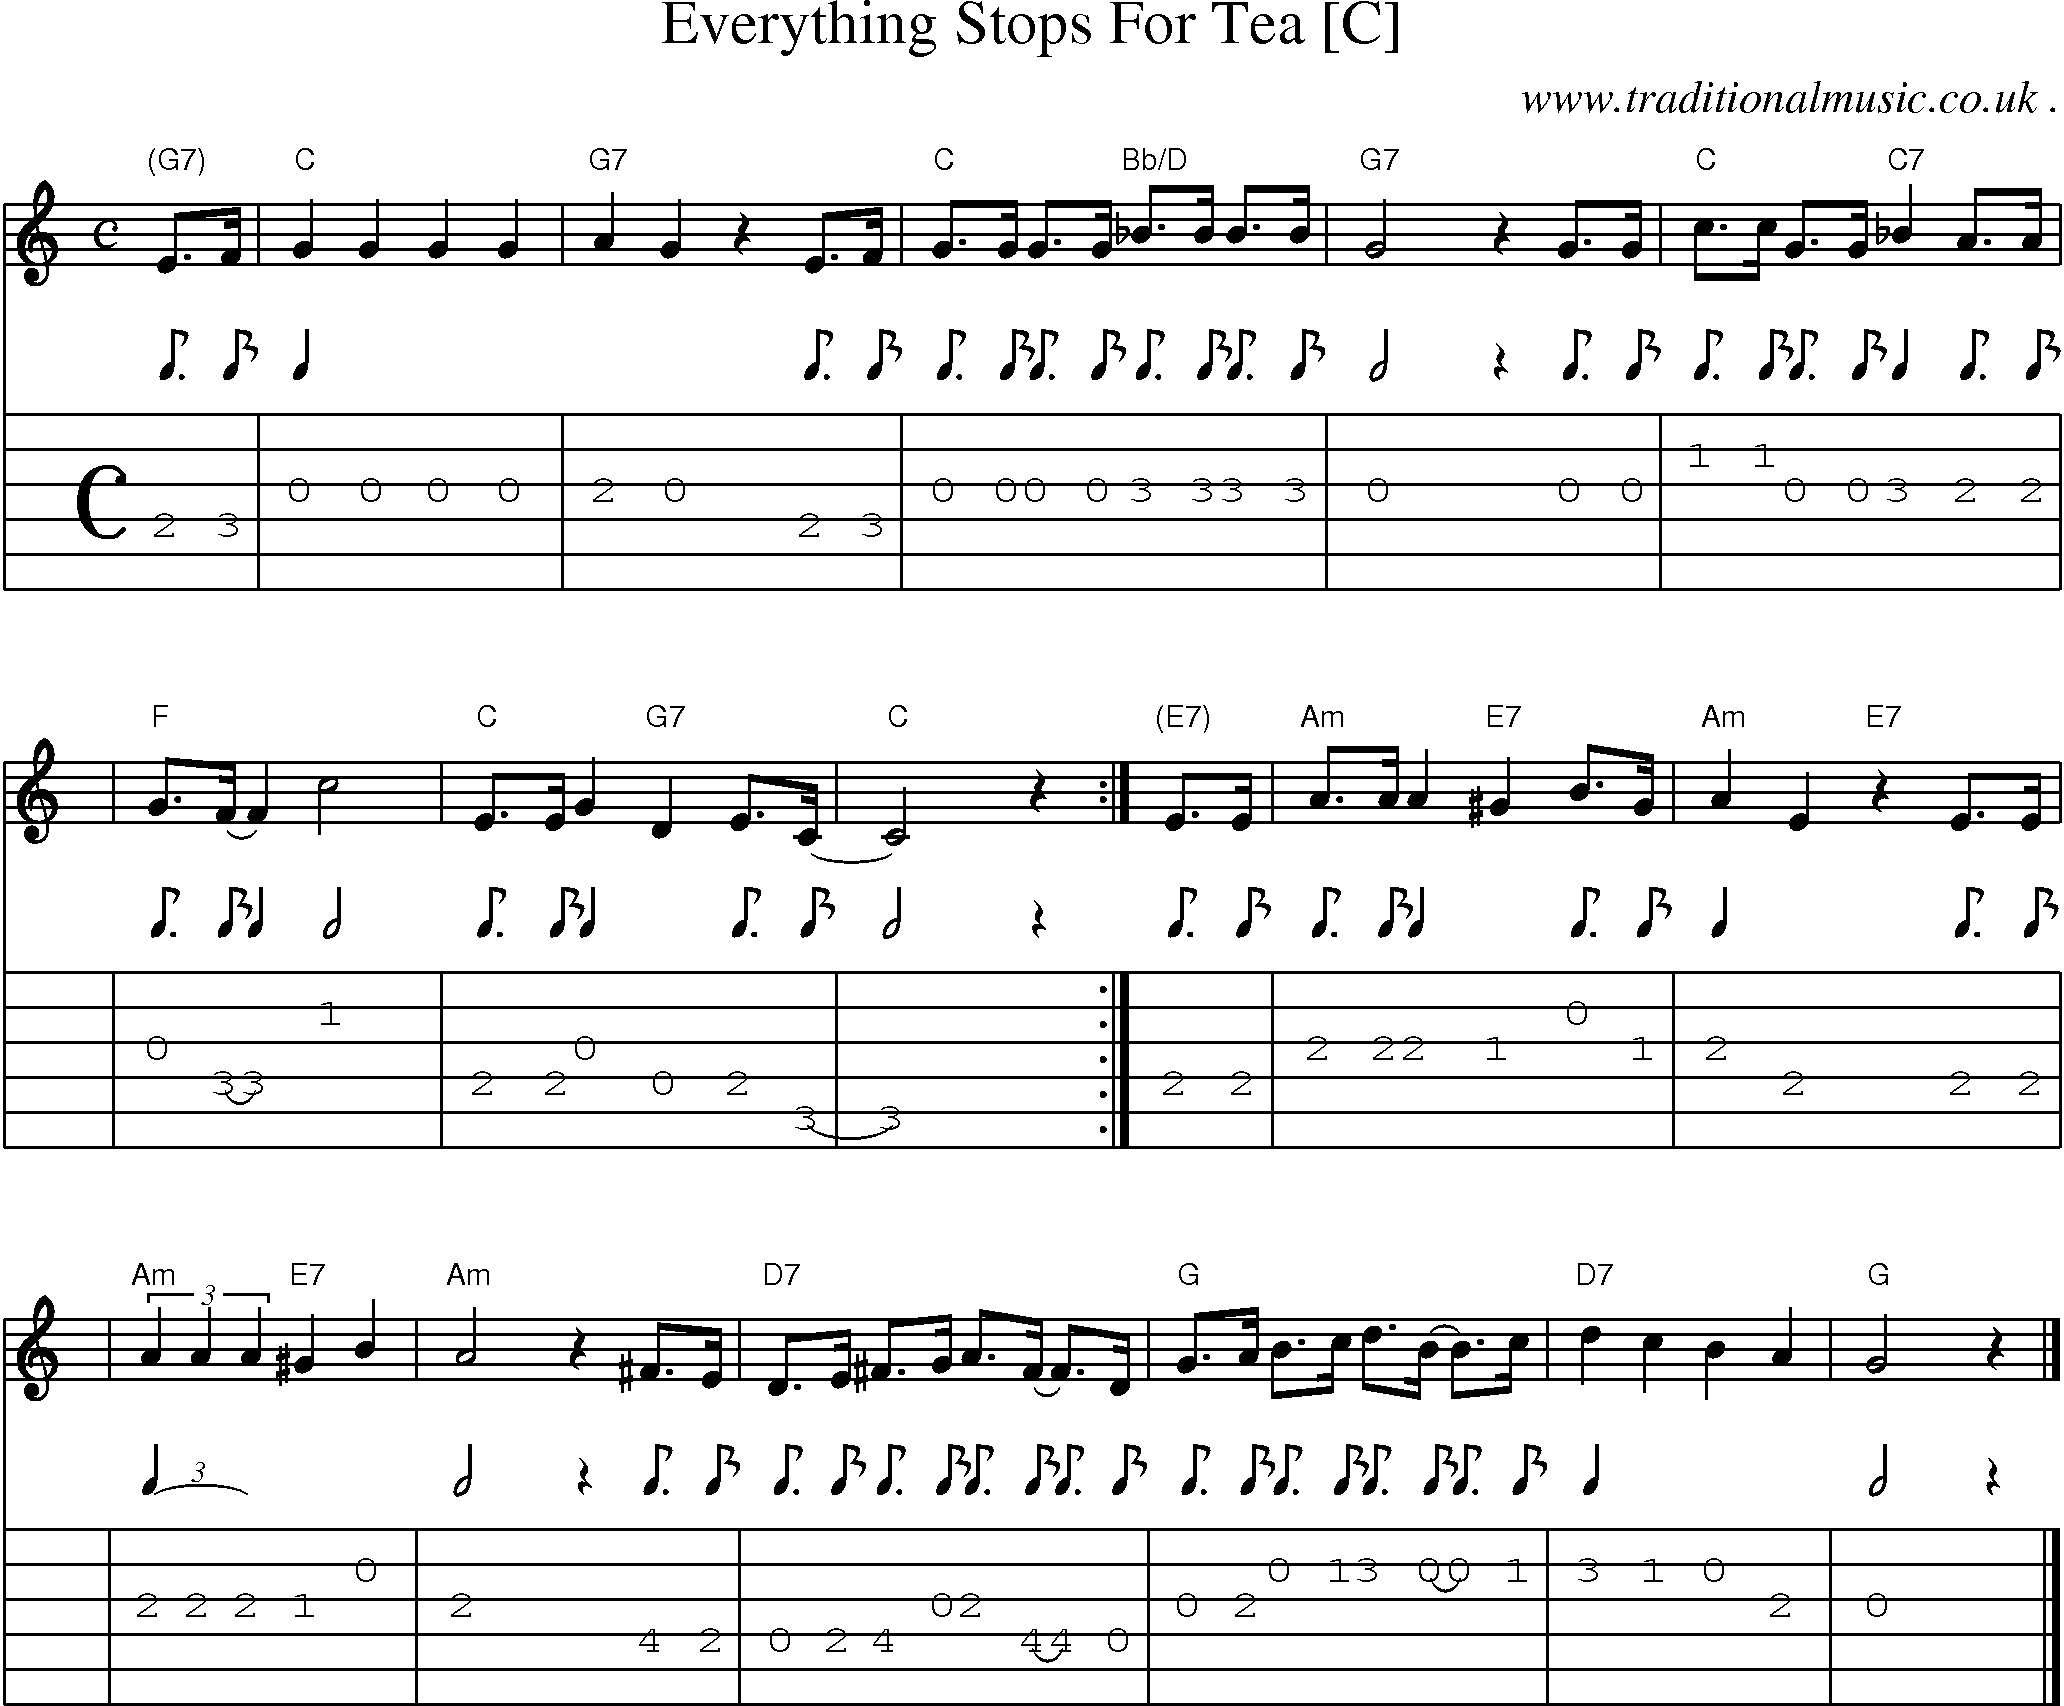 Sheet-music  score, Chords and Guitar Tabs for Everything Stops For Tea [c]